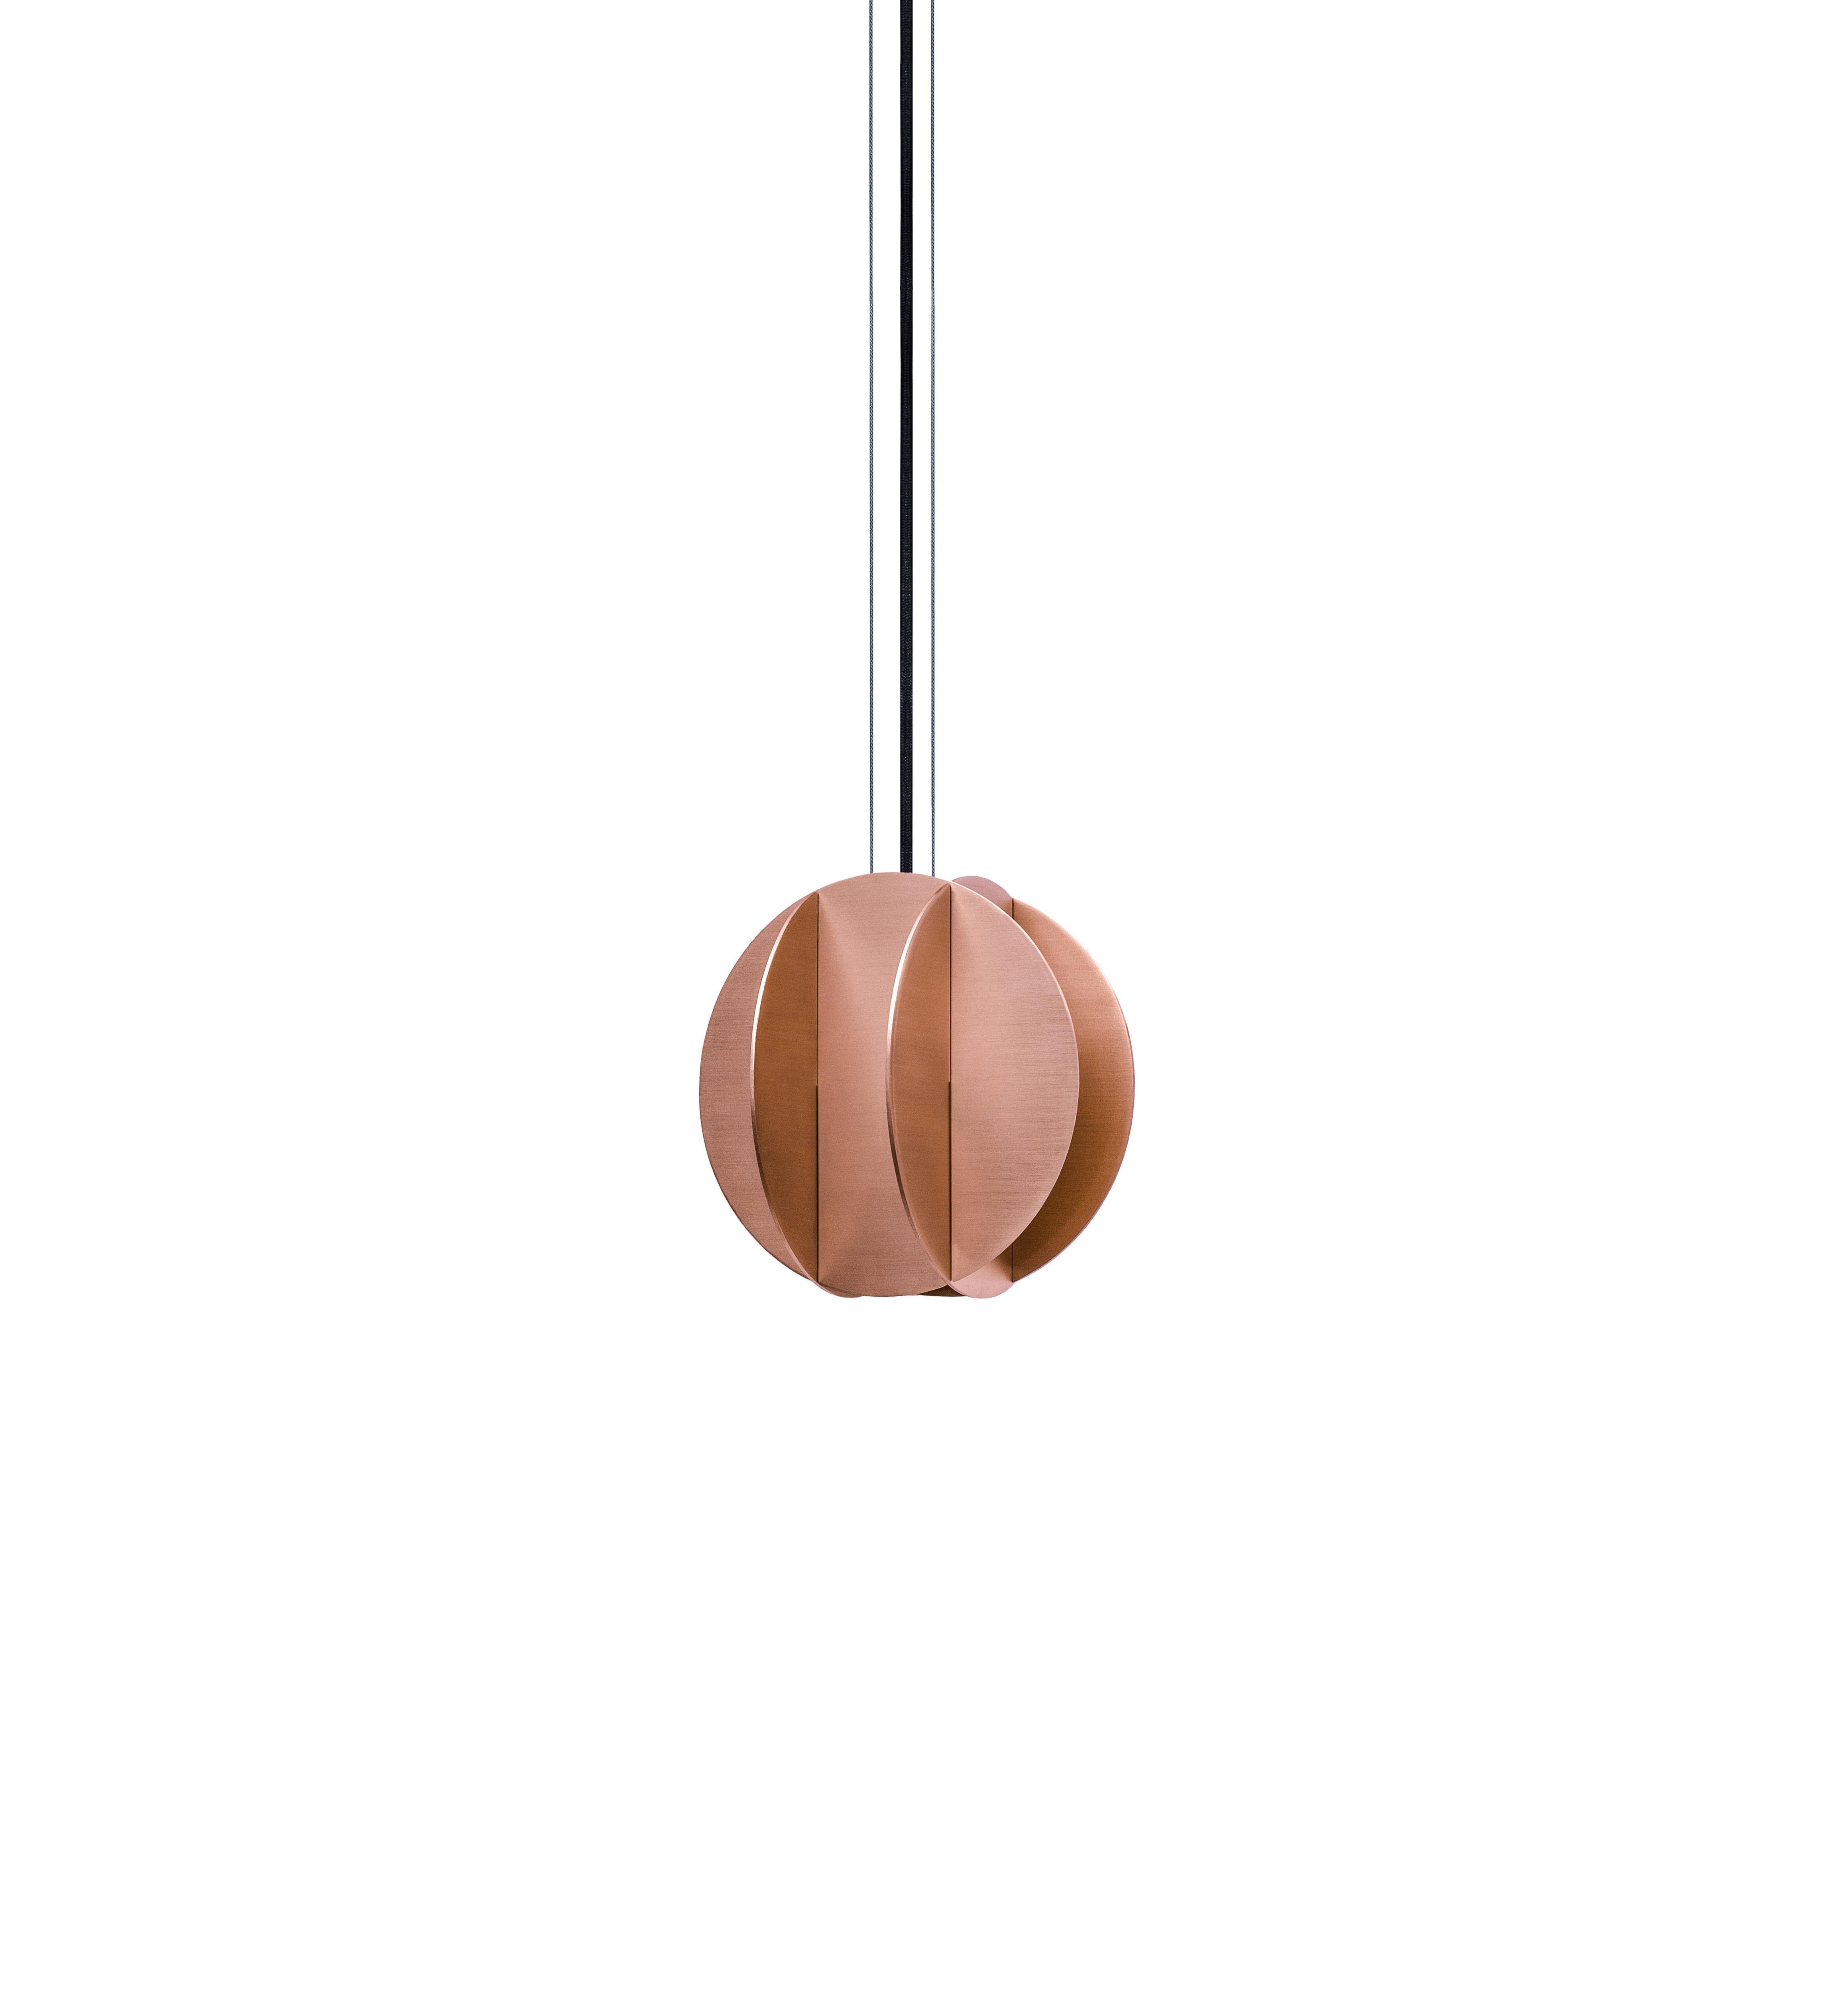 Brand: NOOM
Designer: Kateryna Sokolova
Materials: Copper
Dimensions of each lamp: H 15 cm x W 15 cm x D 15 cm
Net weight of each lamp: 1,5 kg
Electrification of each lamp: 2 × LED G9 10W.

EL collection of lighting is inspired by the geometric